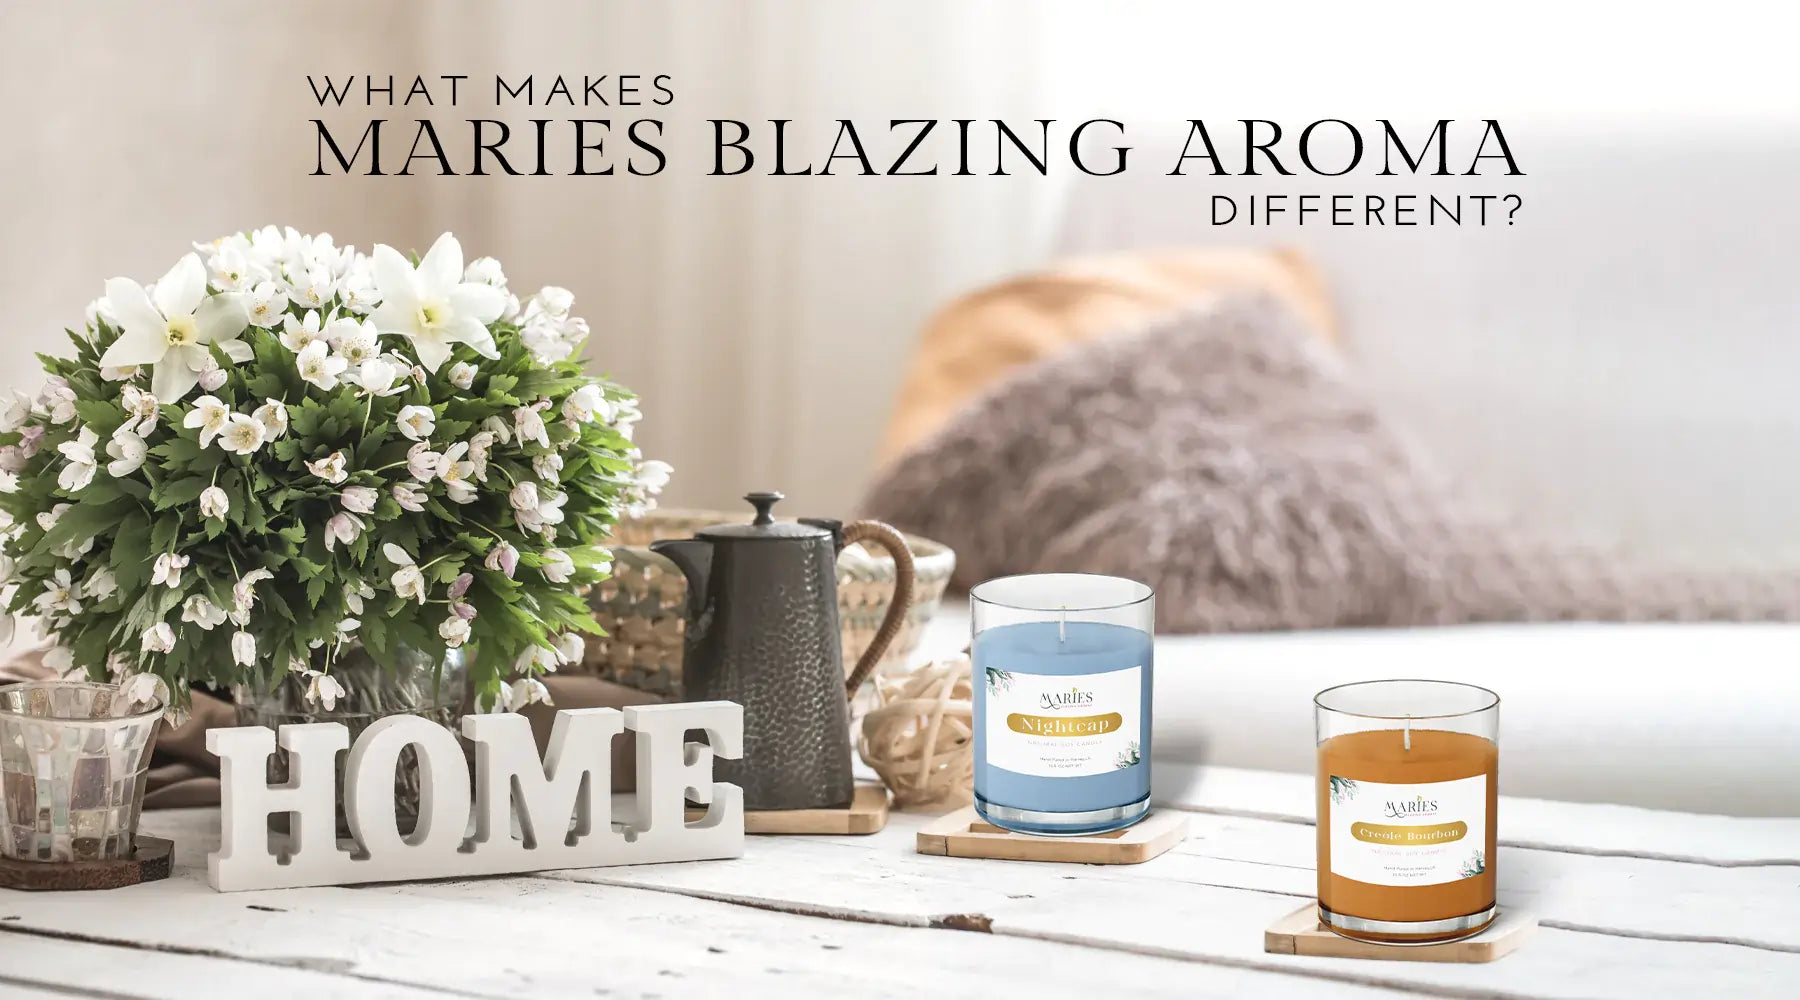 What Makes Maries Blazing Aroma Different